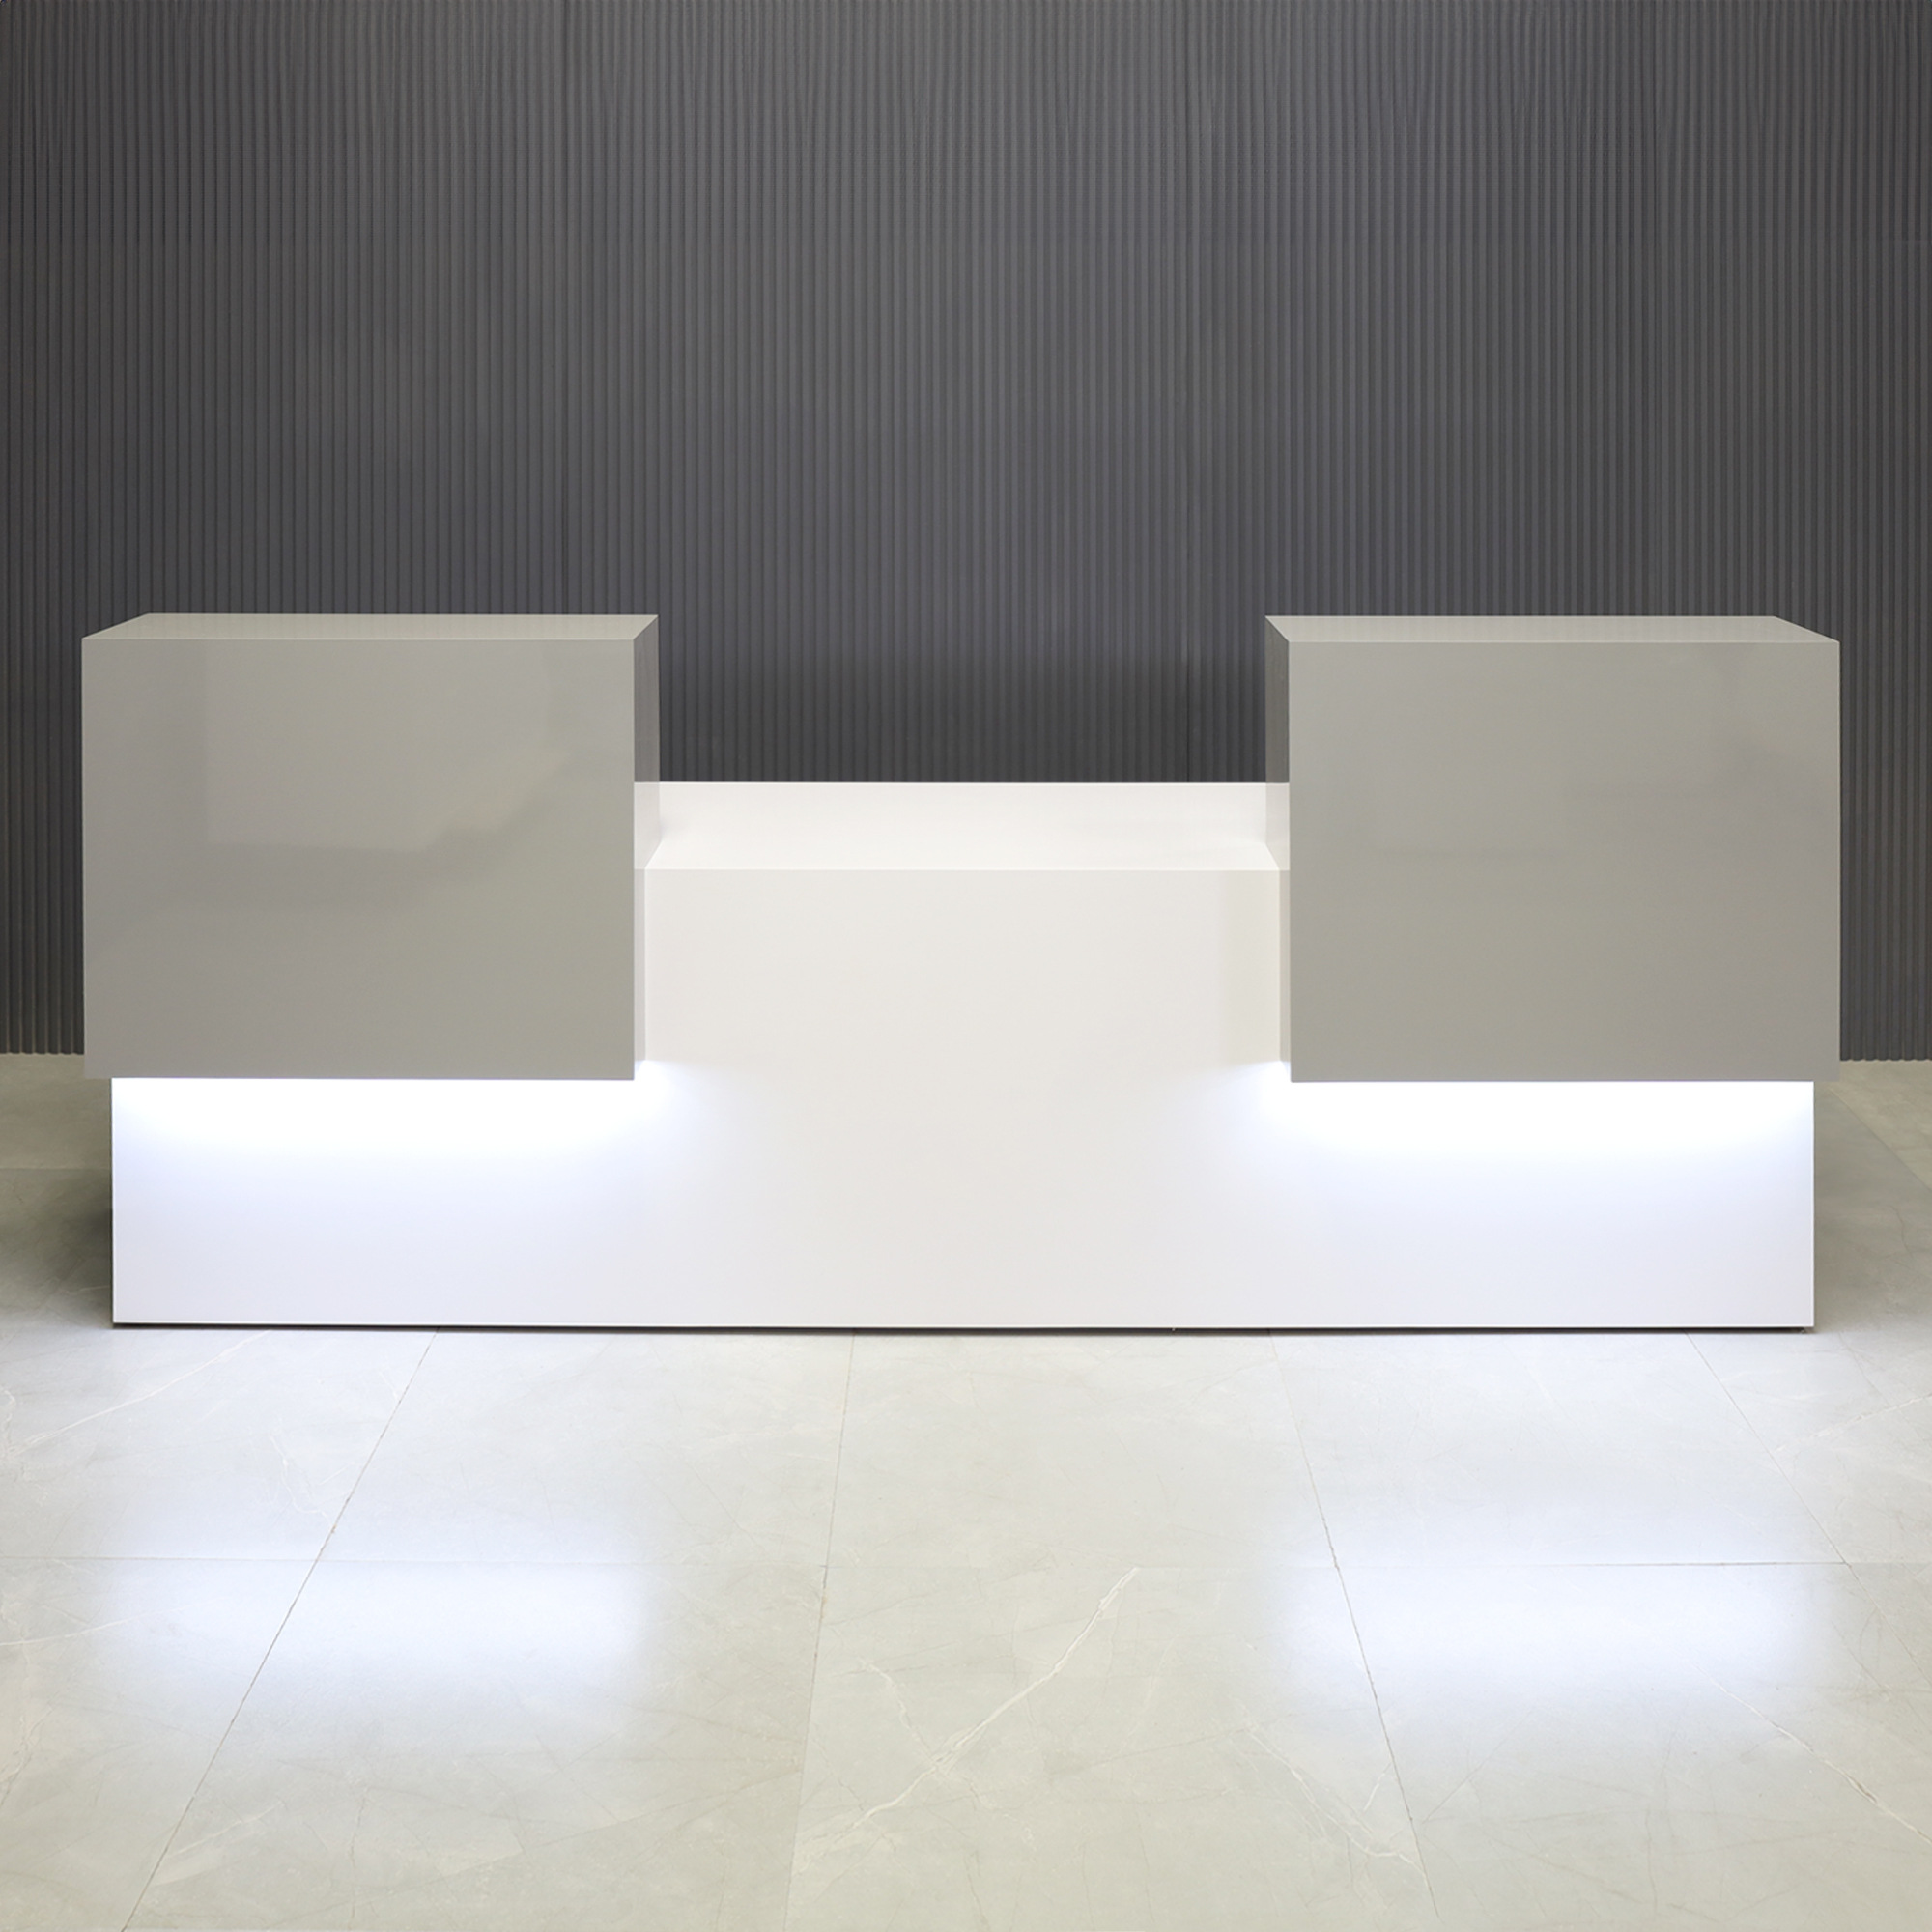 96-inch Los Angeles Double Counter Custom Reception Desk in light gray gloss laminate counters and white gloss laminate desks, with white LED, shown here.